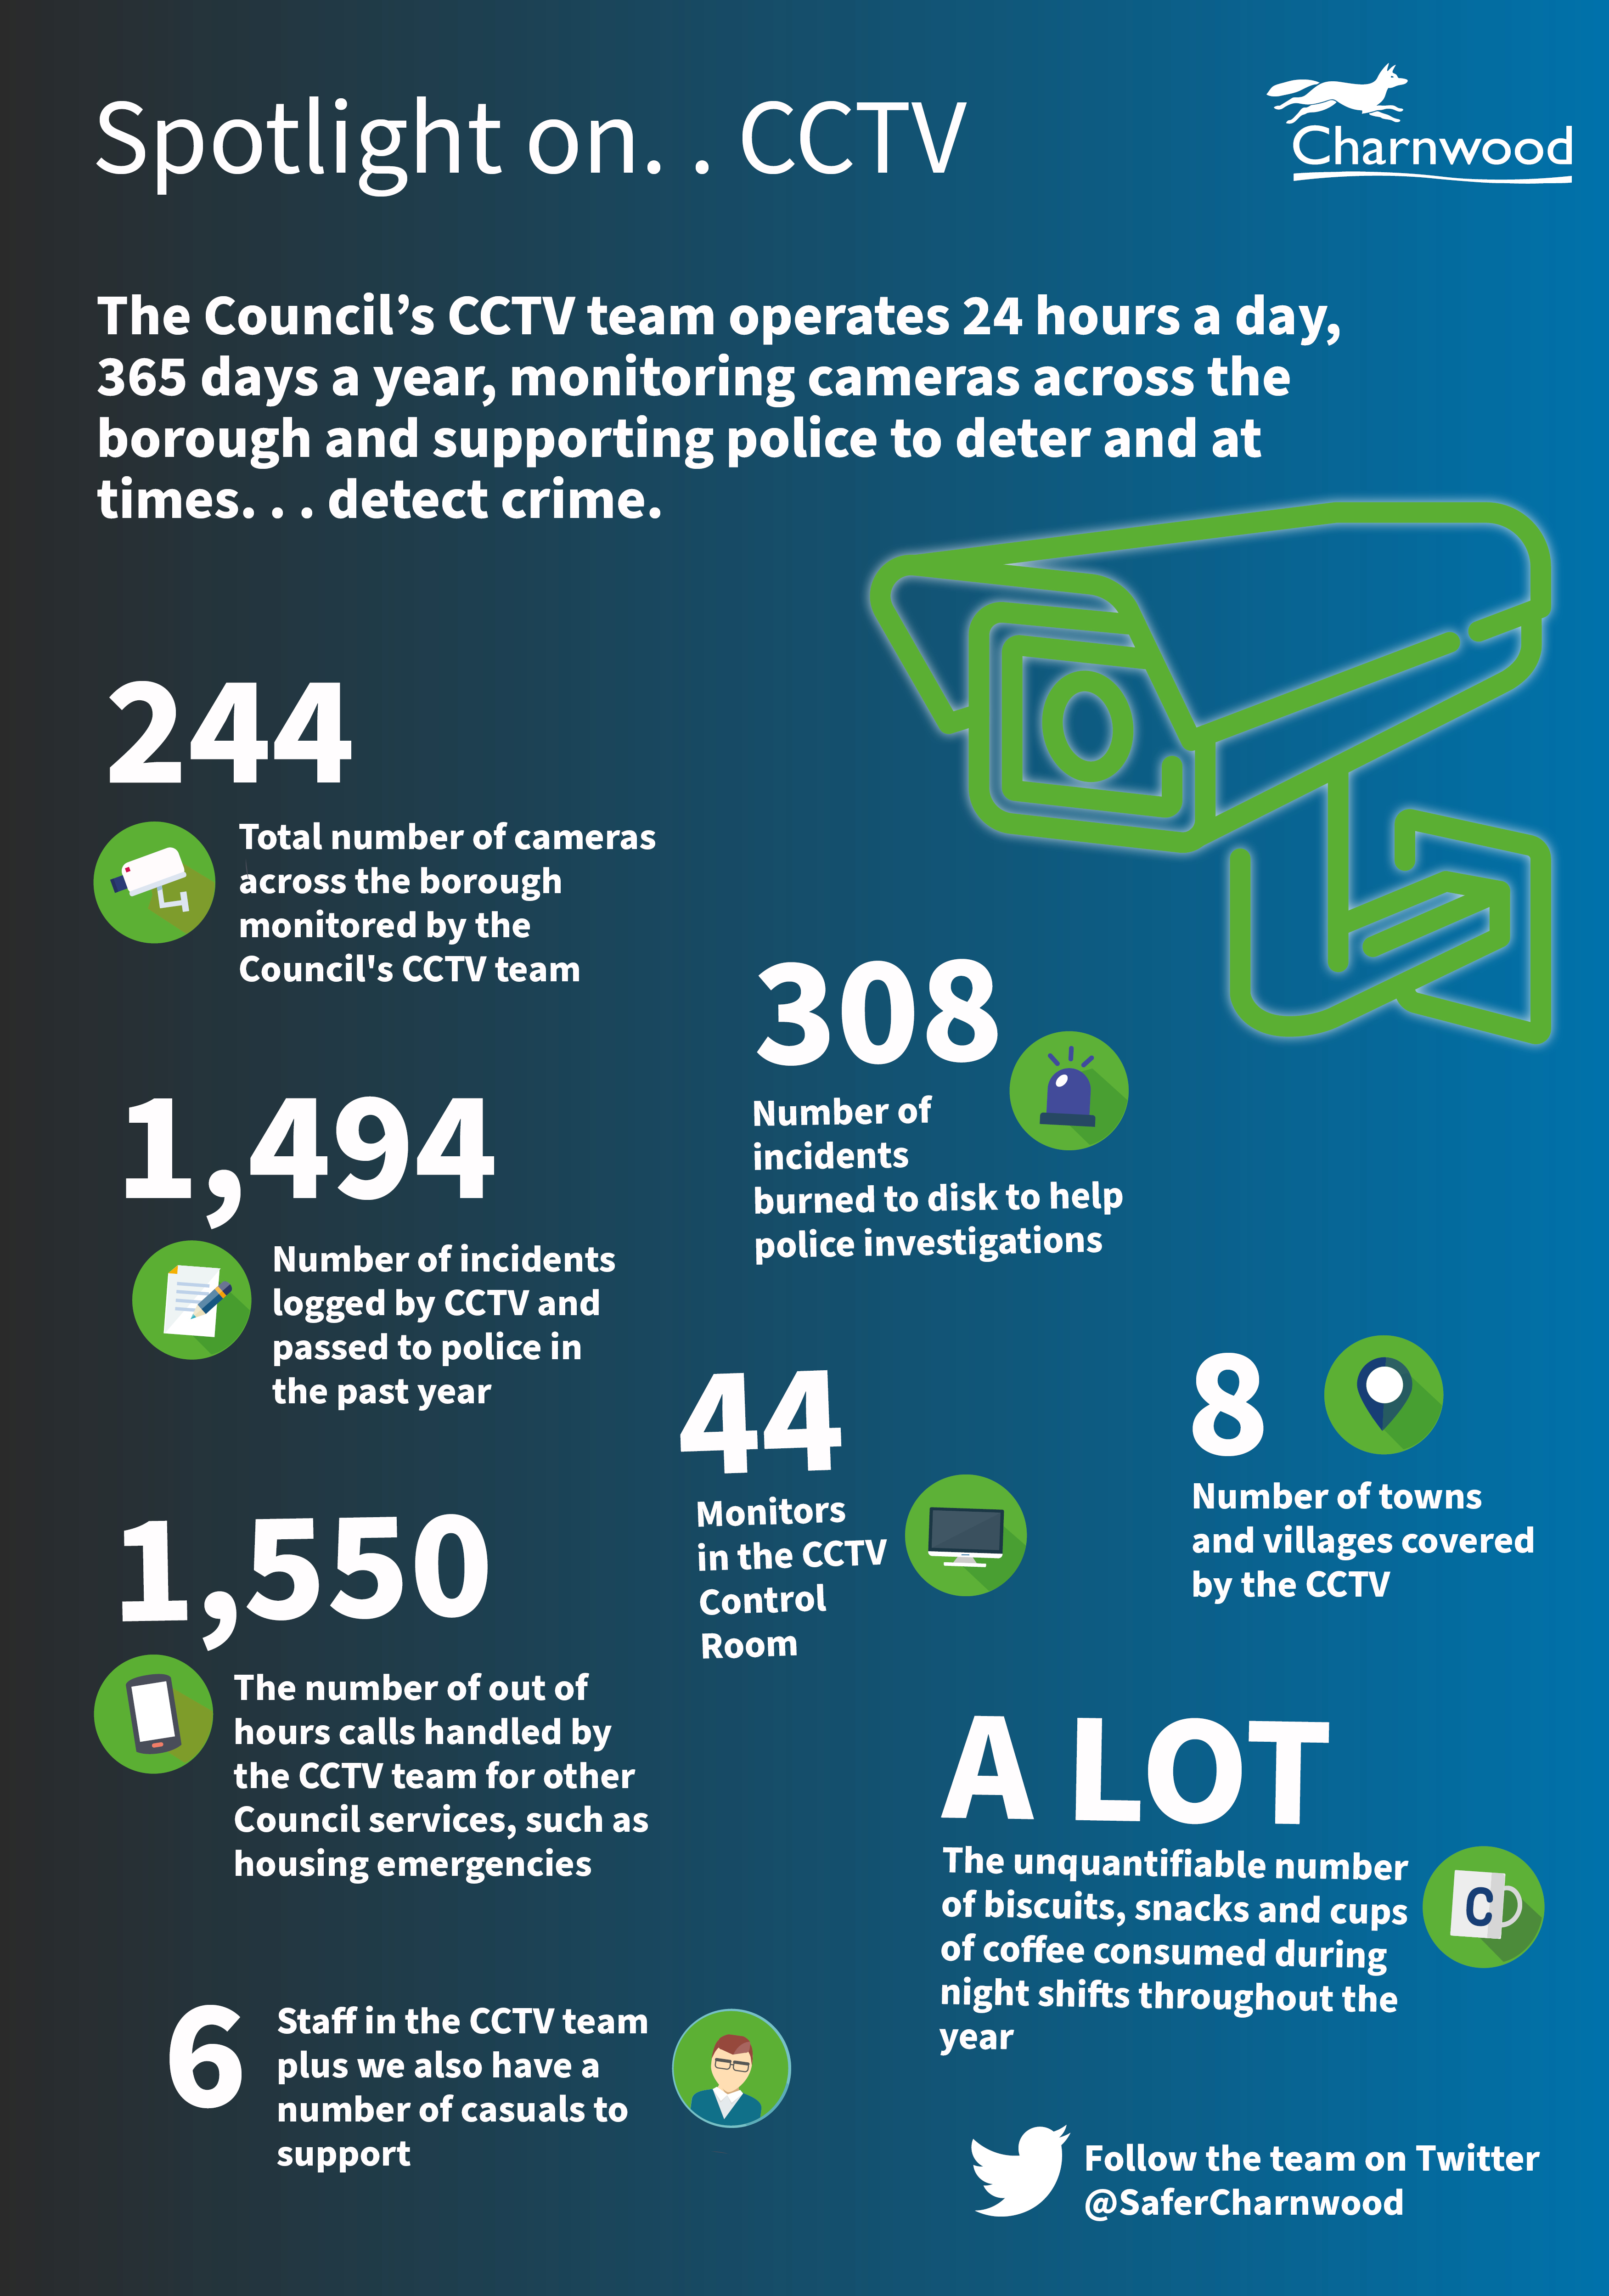 The image shows some statistics relating to CCTV, including: 244 - Total number of cameras across the borough monitored by the Council's CCTV team1,494 - Number of incidents logged by CCTV and passed to police in the past year1,550 - The number of out-of-hours calls handled by the CCTV team for other Council services, such as housing emergencies6 - Staff in the CCTV team plus we also have a number of casuals to support308 - Number of incidents burned to disk to help police investigations44 - Monitors in the CCTV Control Room8 - Number of towns and villages covered by the CCTVA LOT - The unquantifiable number of biscuits, snacks and cups of coffee consumed during night shifts throughout the year